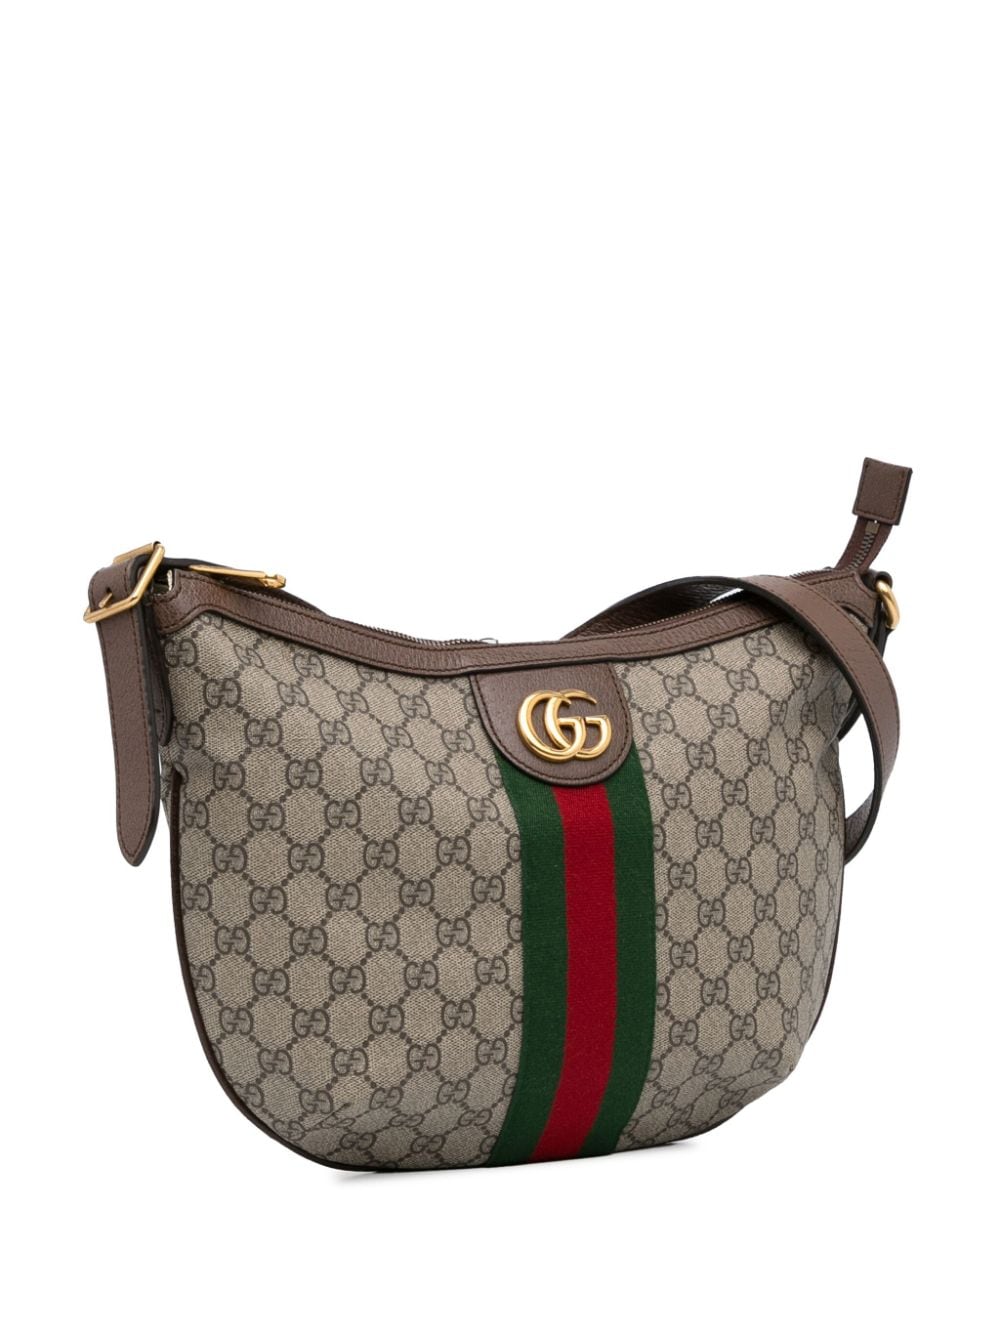 Gucci, Bags, Vintage Gucci Ophidia Crossbody Bag 98s